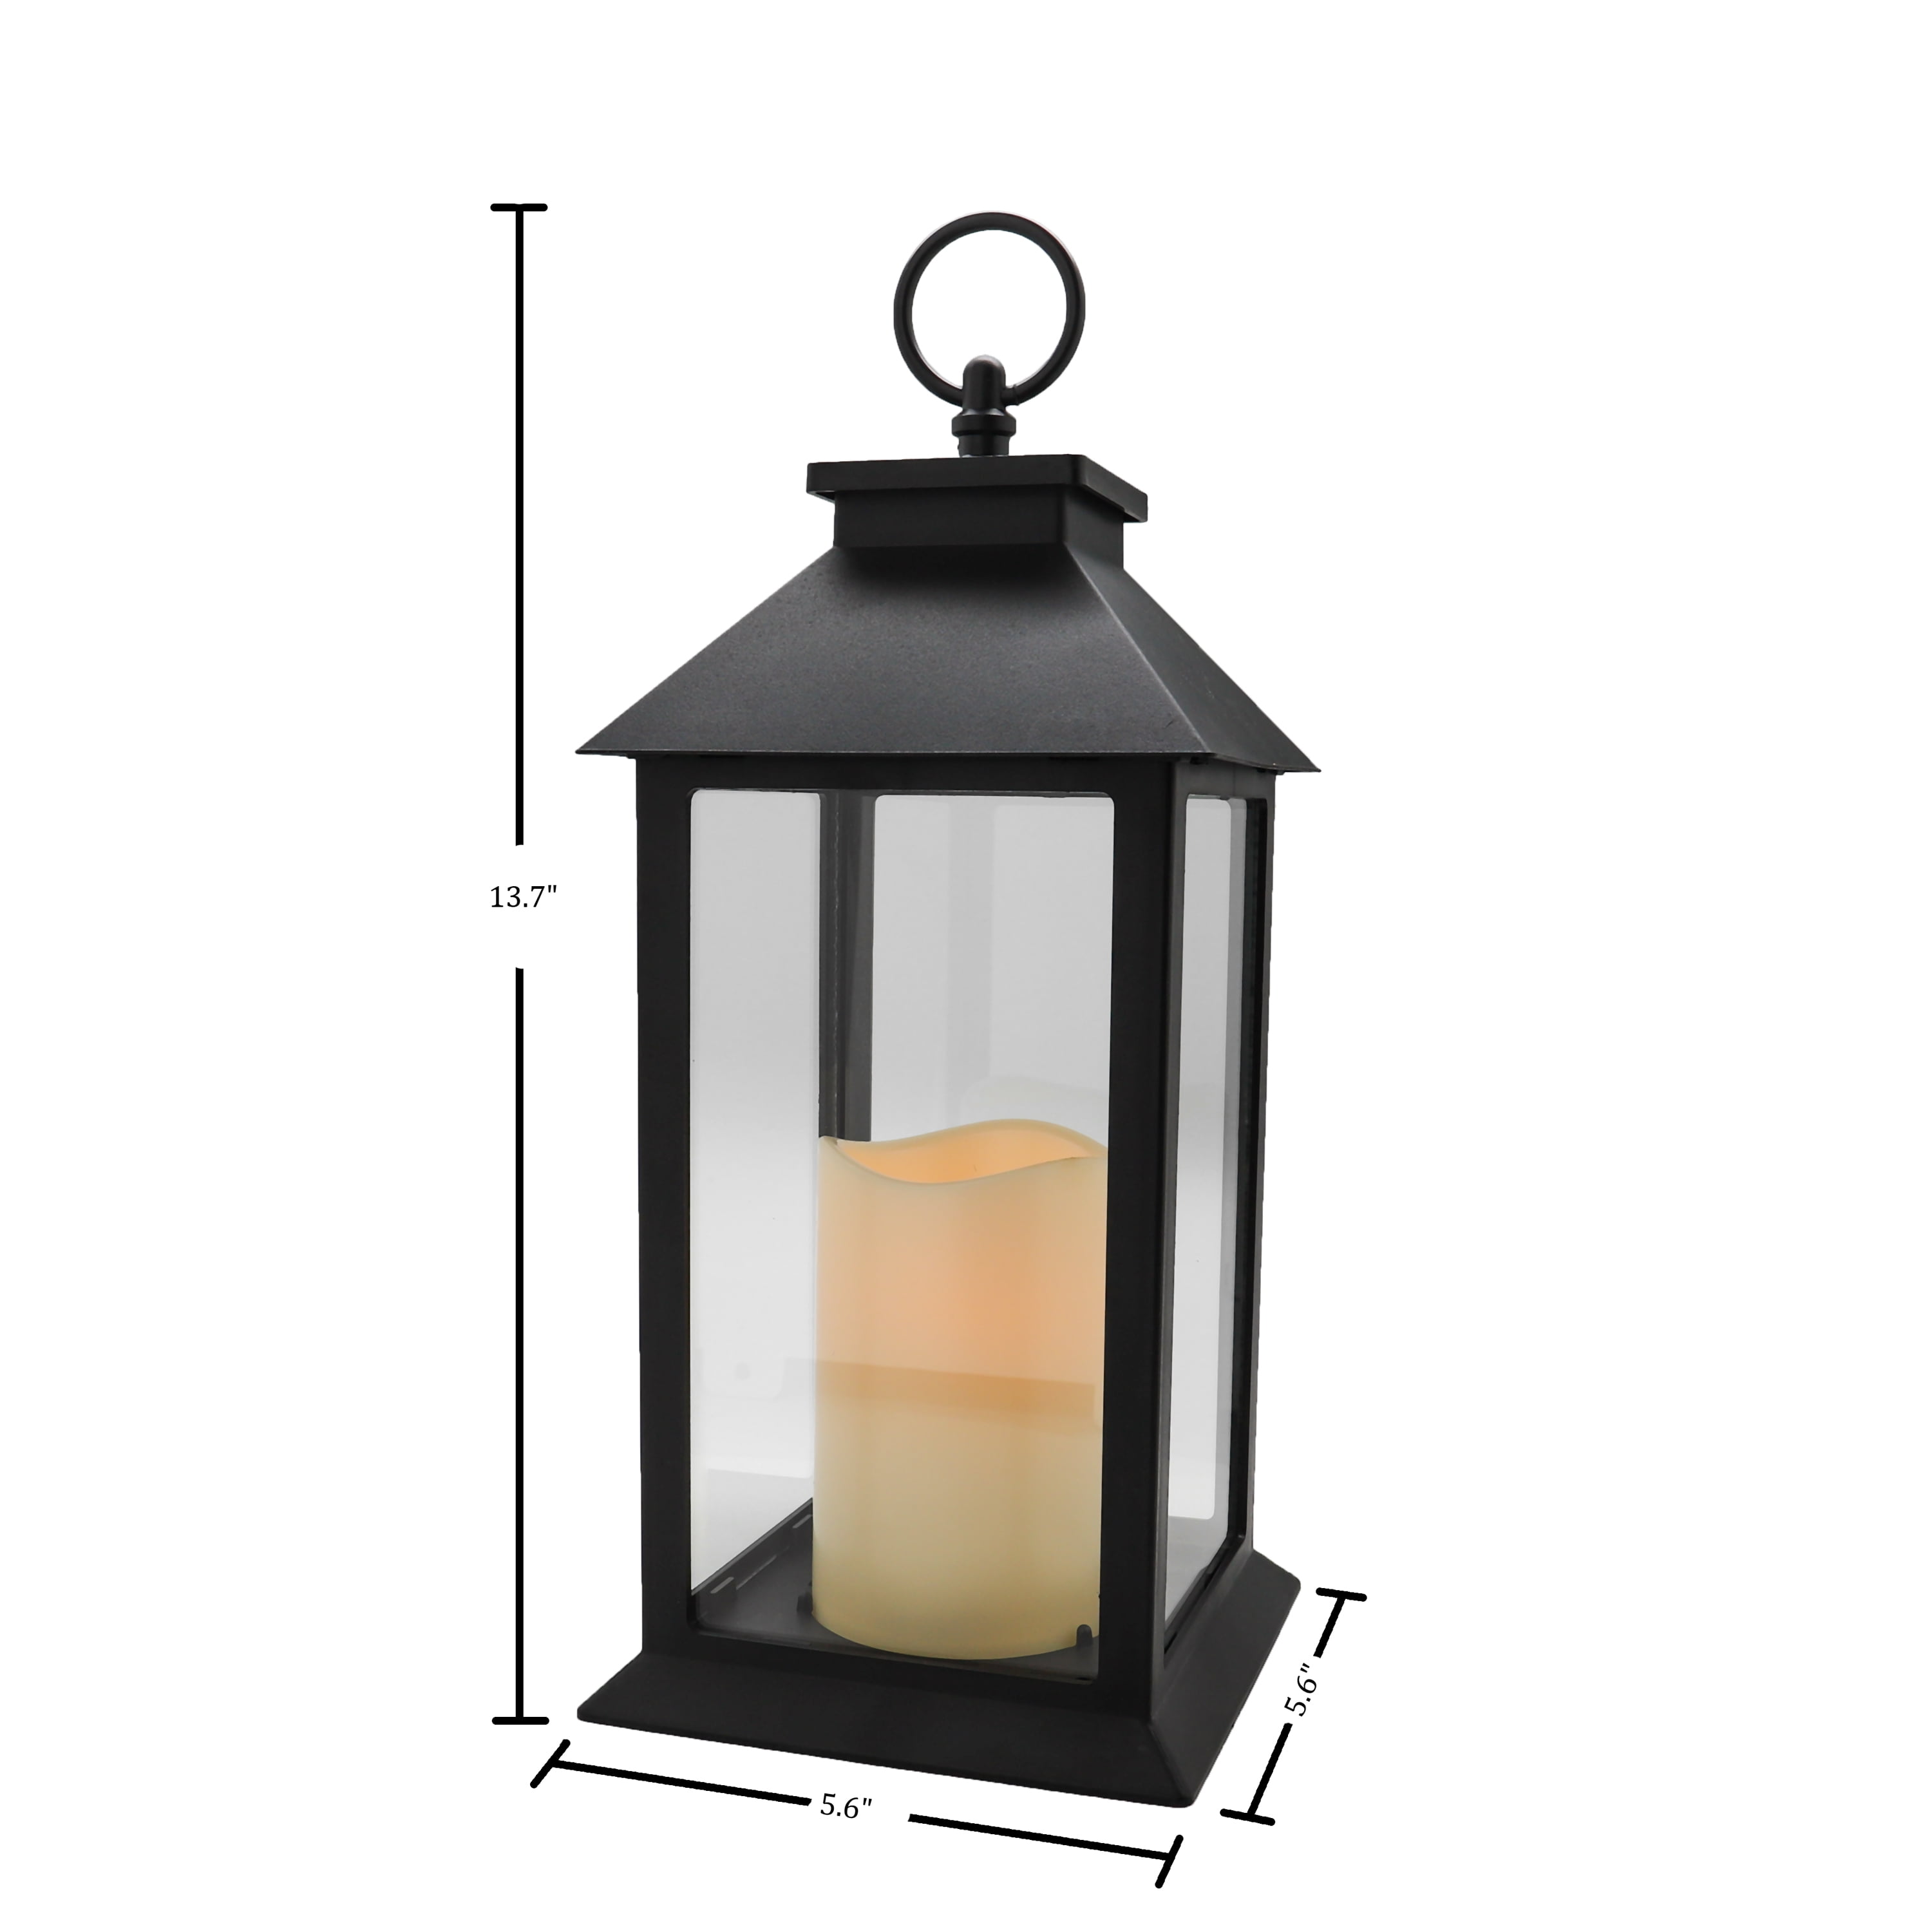 zkee Mini Star Lantern with Flickering LED,CR2032 Battery Included,Decorative Hanging Lantern,Christmas Decorative Lantern,Indoor Candle Lantern